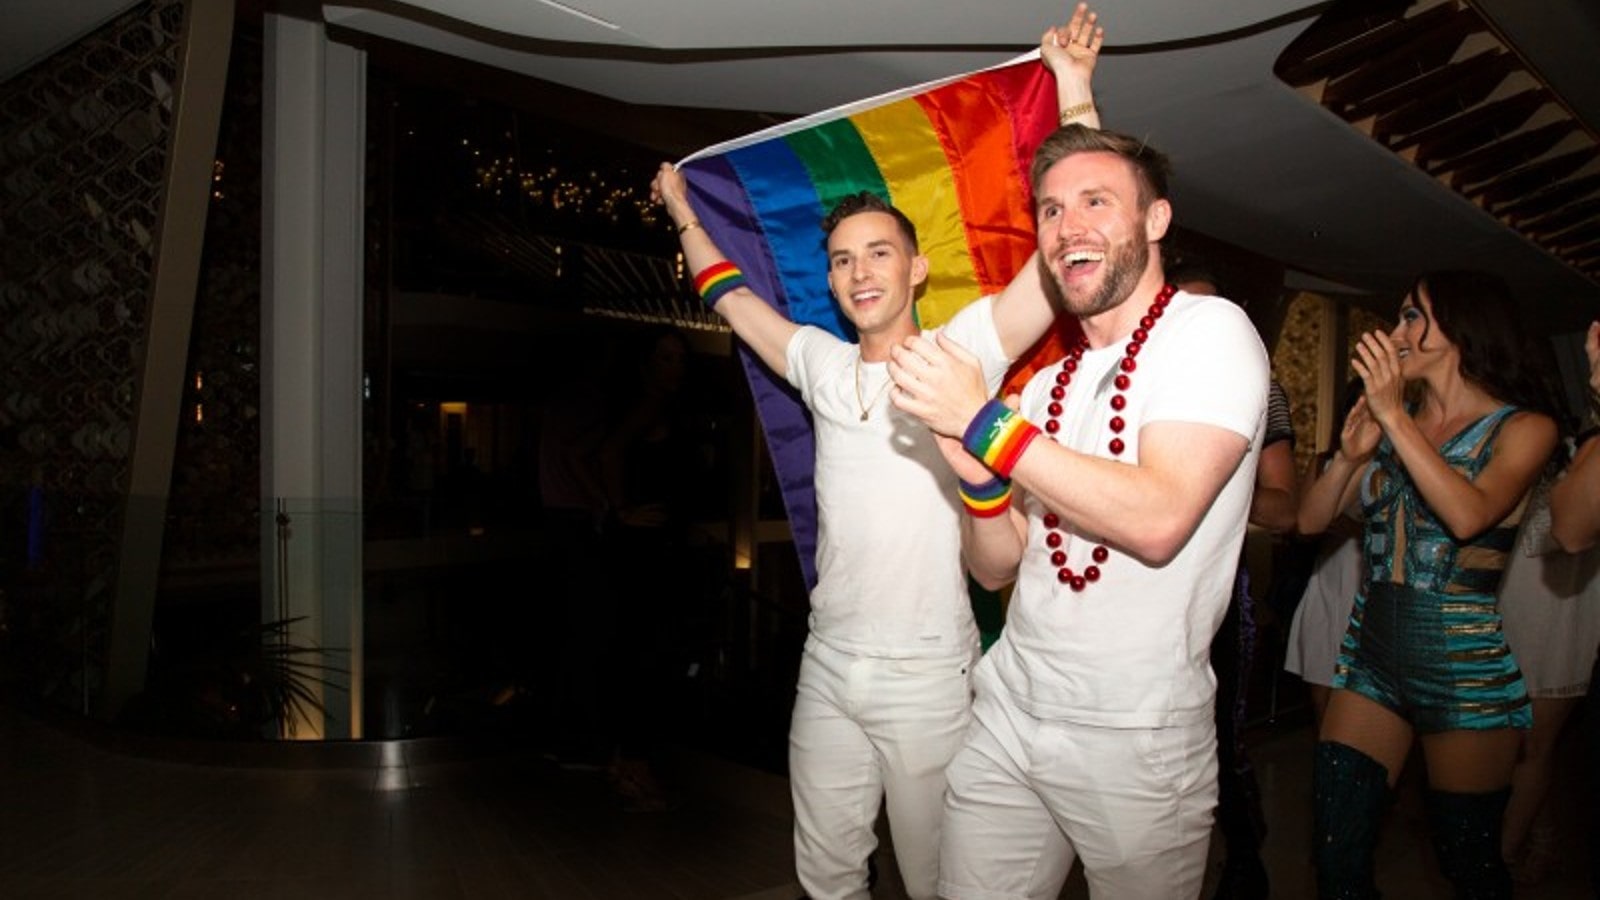 Celebrity Lgbt cruises pride party